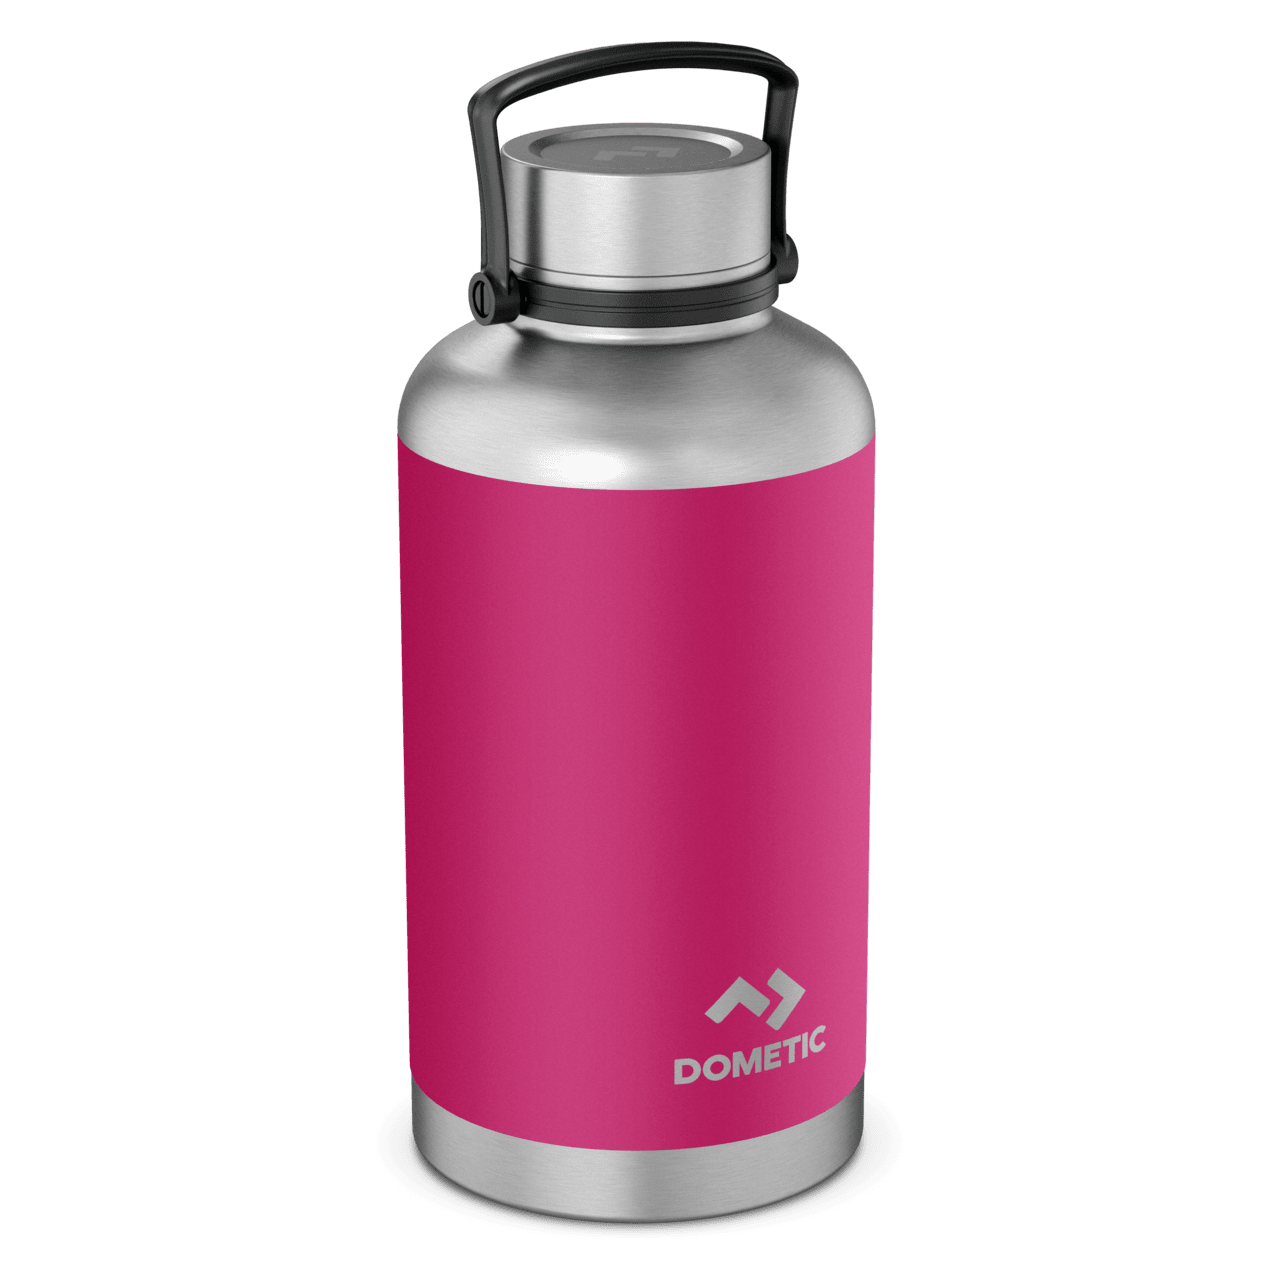 Dometic - Dometic Thermo Bottle 192 - Orchisd